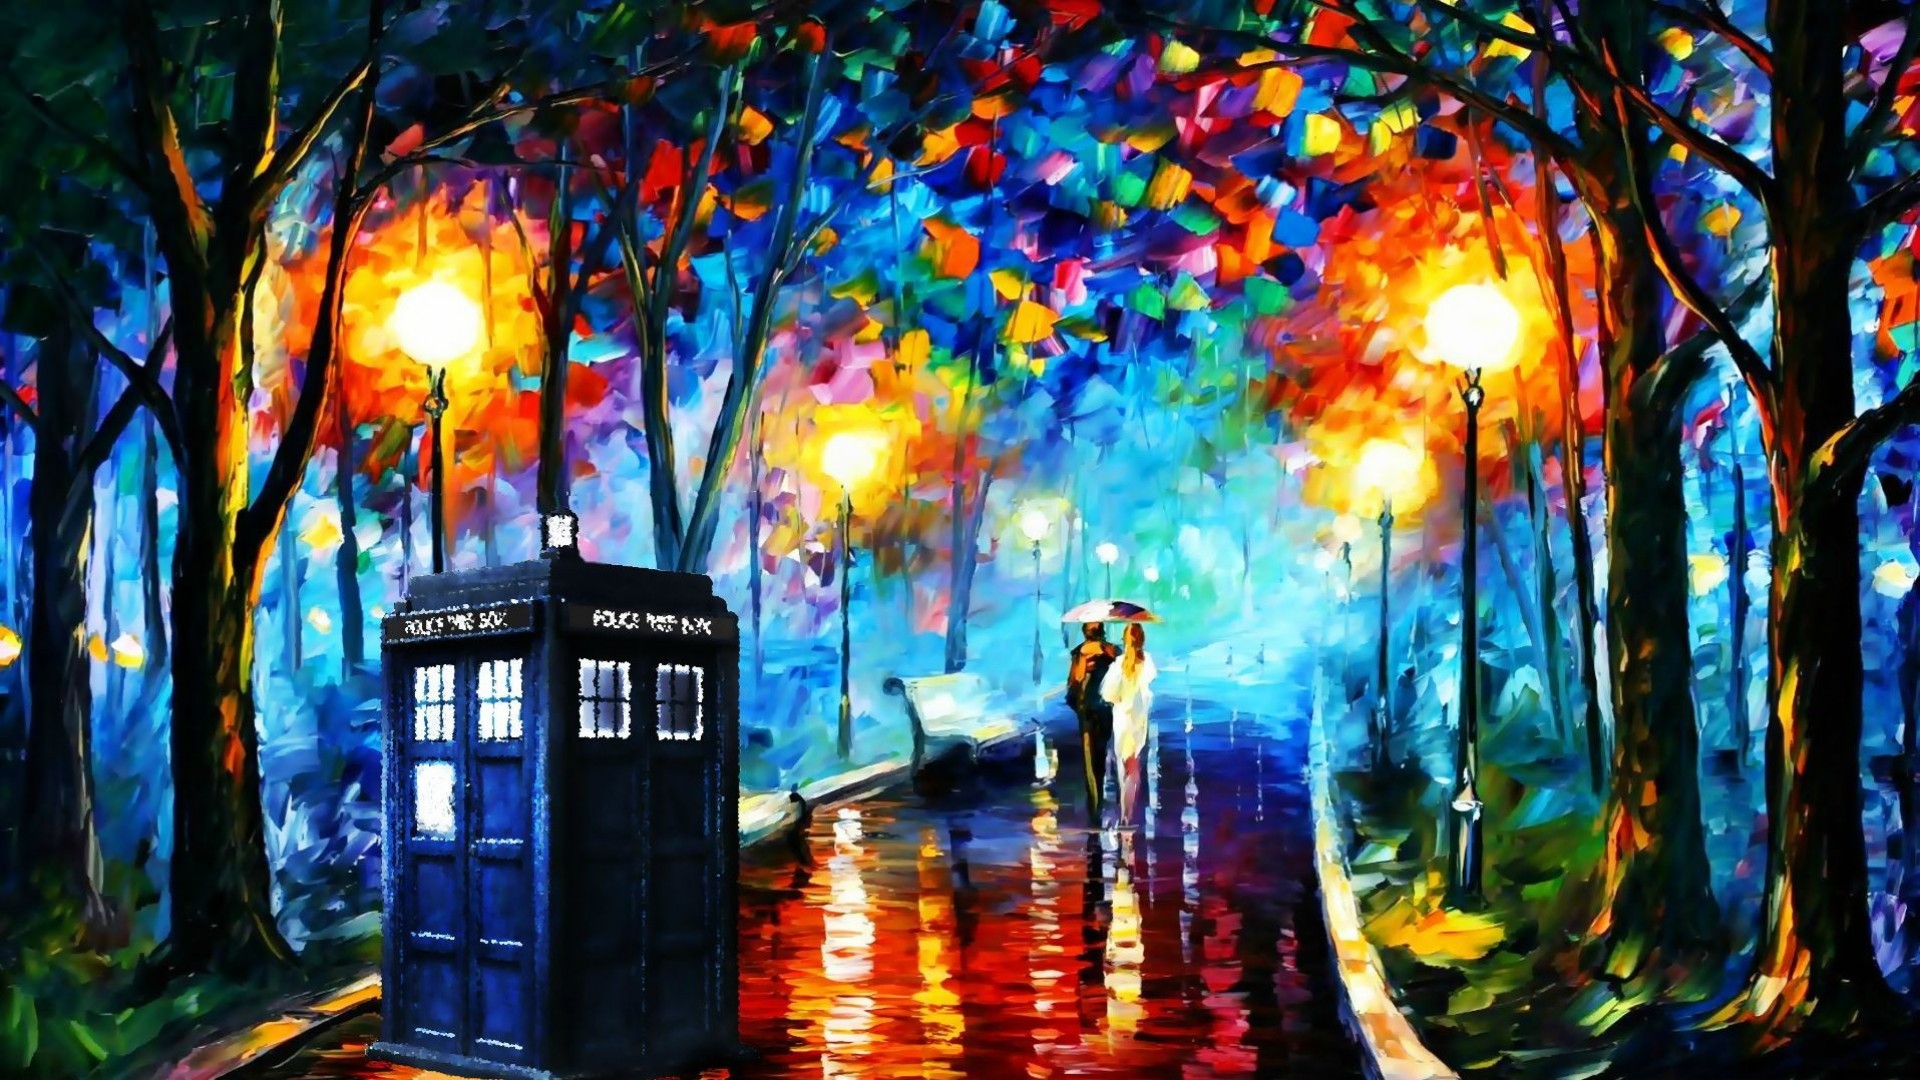 doctor who wallpaper,lighting,sky,water,tree,reflection